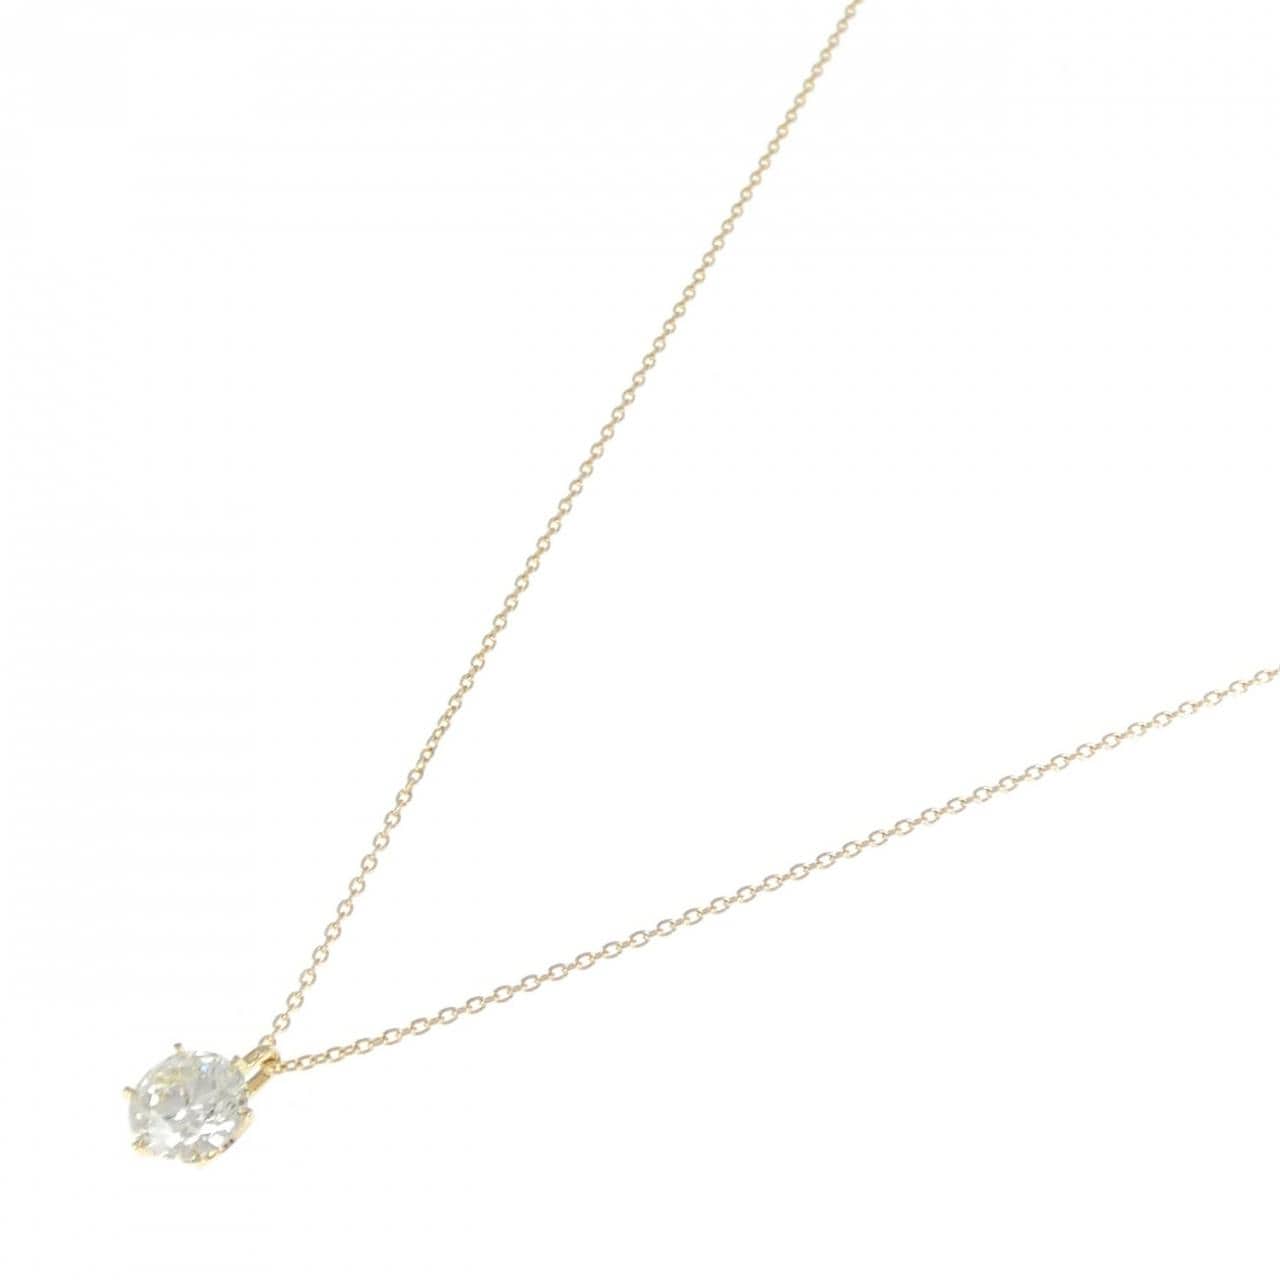 [Remake] K18YG Diamond Necklace 1.089CT VLY SI2 EXT H&amp;C